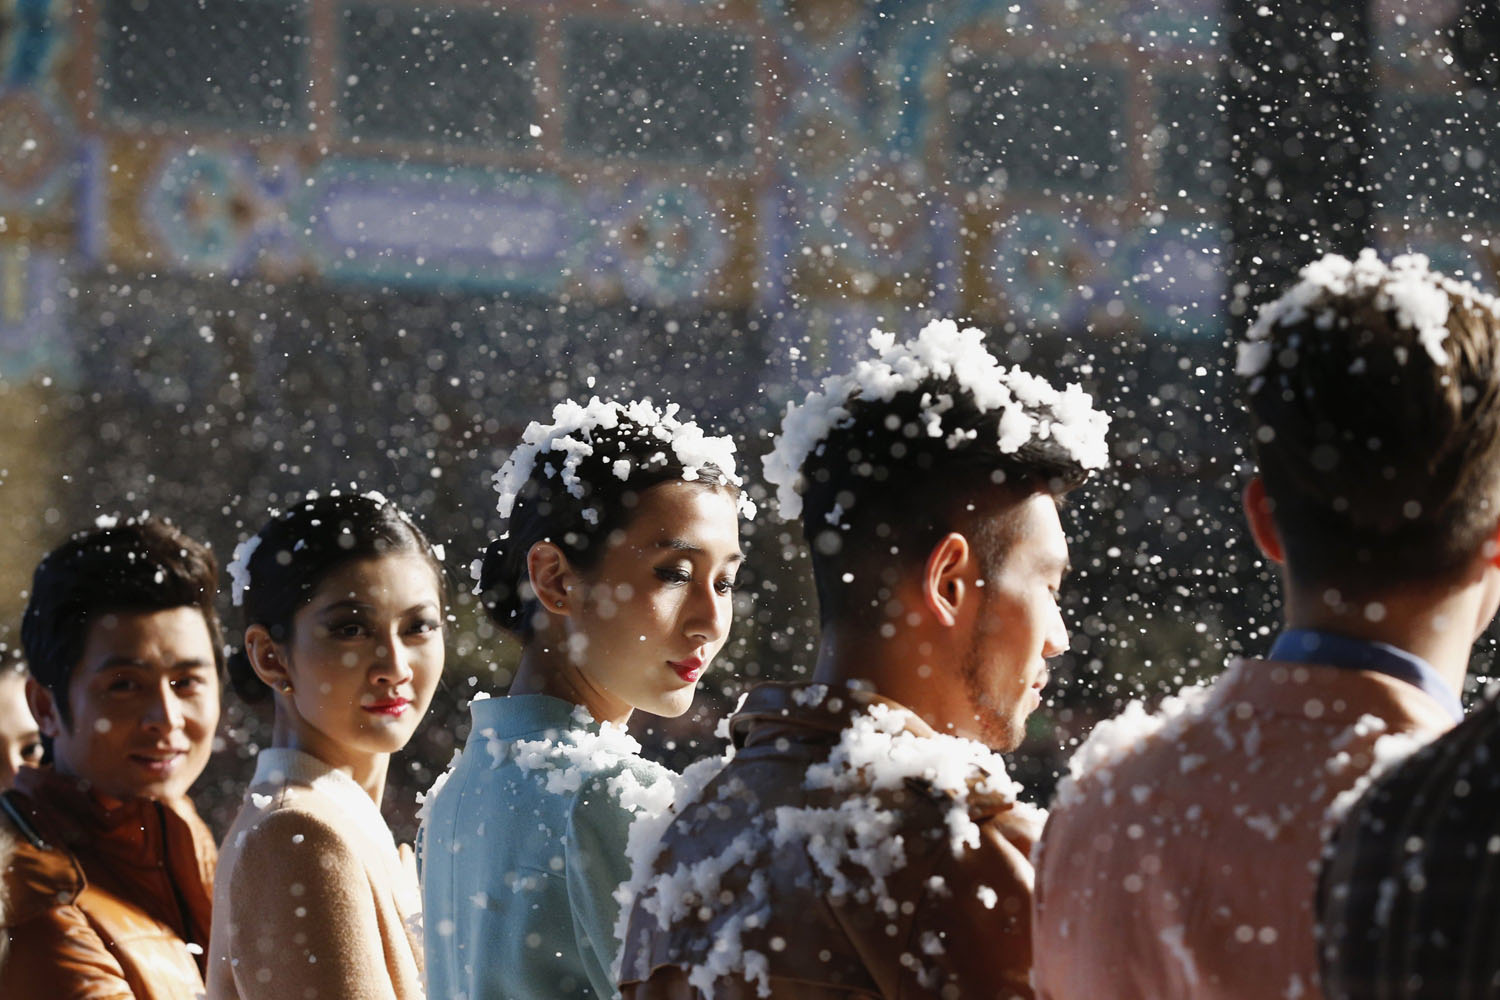 March 26, 2013. Model are seen covered with artificial snow flakes during a fashion show of VISCAP Yuan Bing collection at China Fashion Week in Beijing. The fashion week runs till March 30.